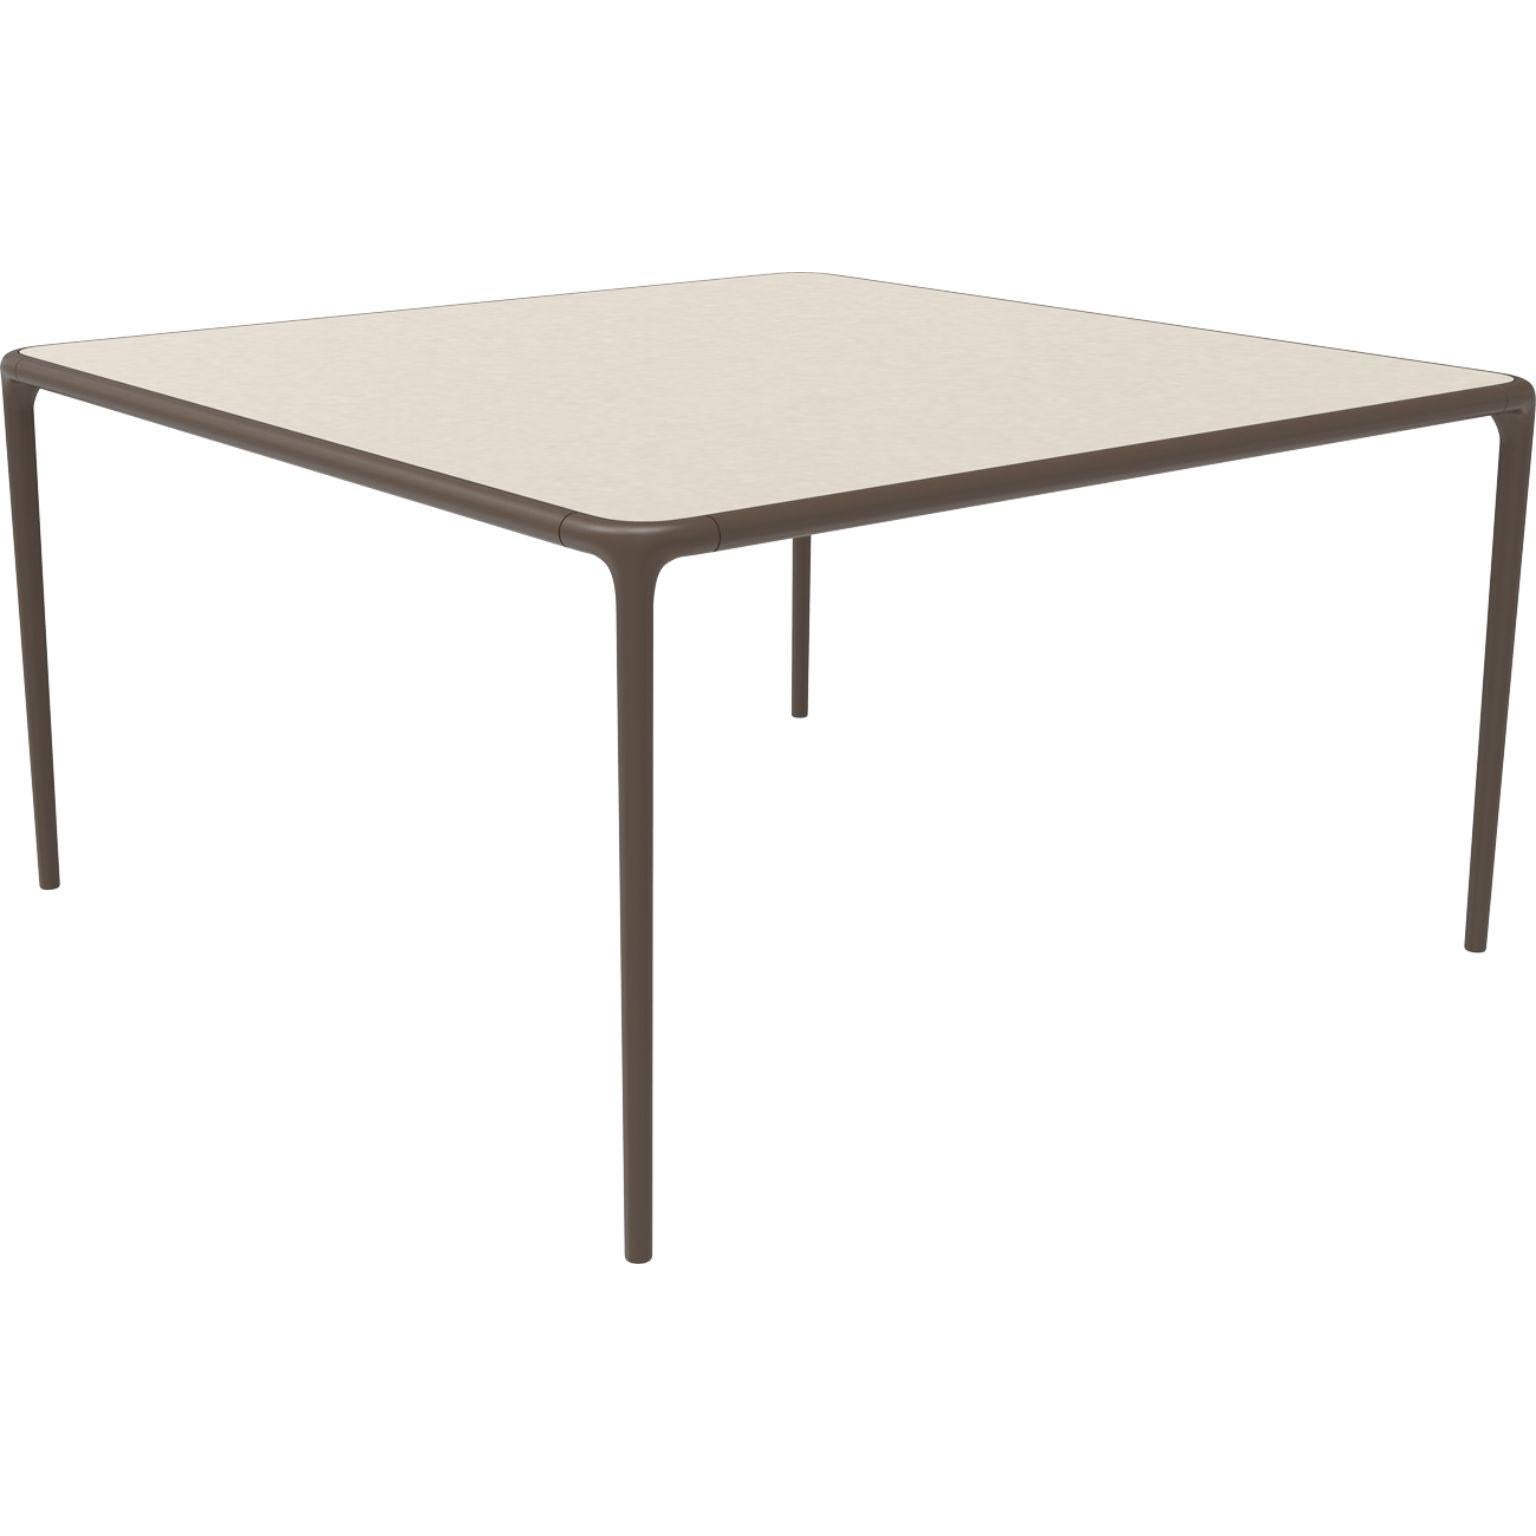 Xaloc bronze glasstop table 140 by Mowee
Dimensions: D 140 x W 140 x H 74 cm
Material: Aluminum, tinted tempered glass top.
Also available in different aluminum colors and finishes (HPL Black Edge or Neolith).

Xaloc synthesizes the lines of